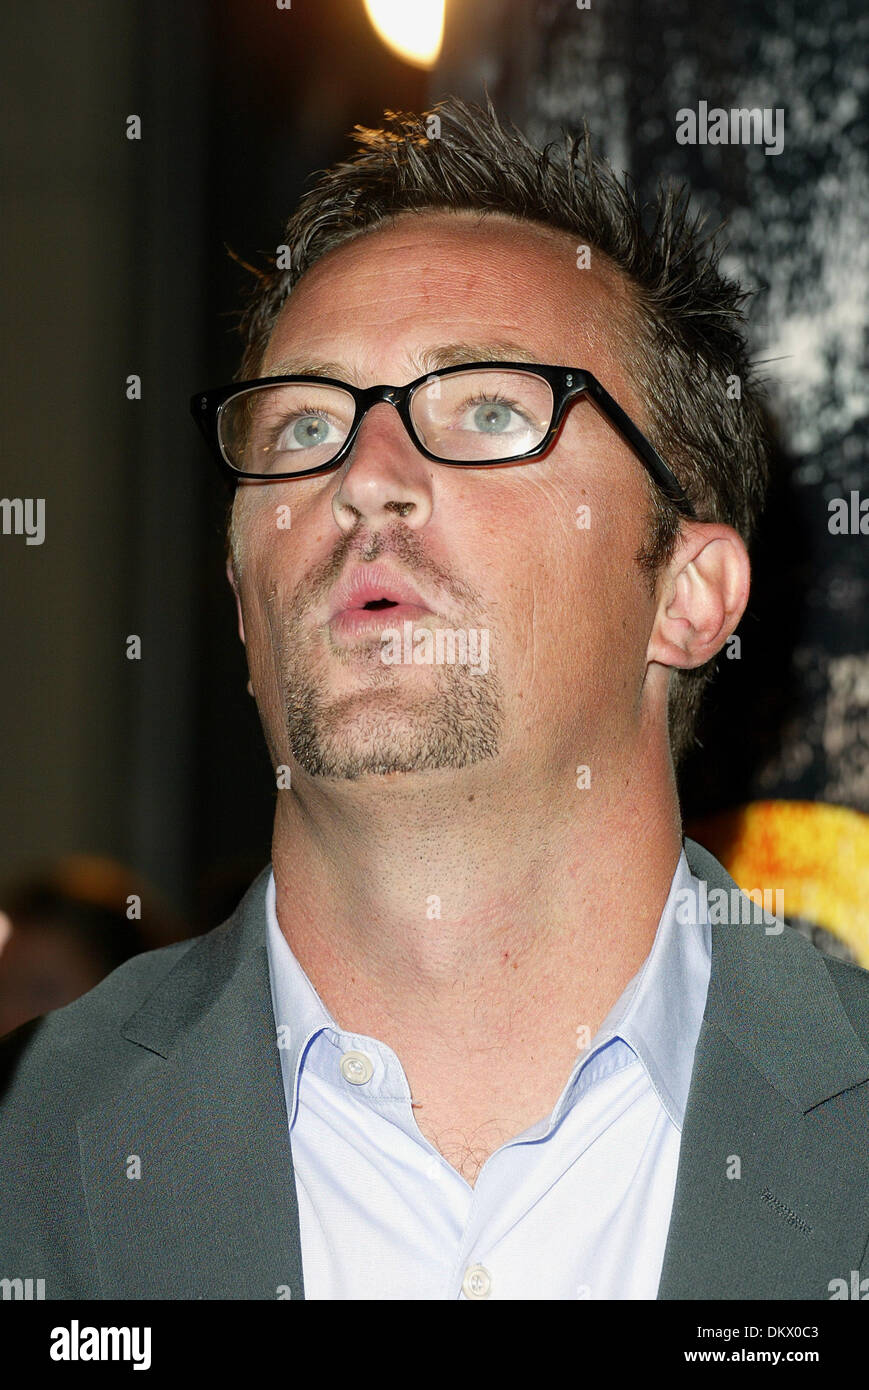 MATTHEW PERRY.ACTOR.WESTWOOD, LOS ANGELES, USA.06/11/2002.LAC10669. Stock Photo